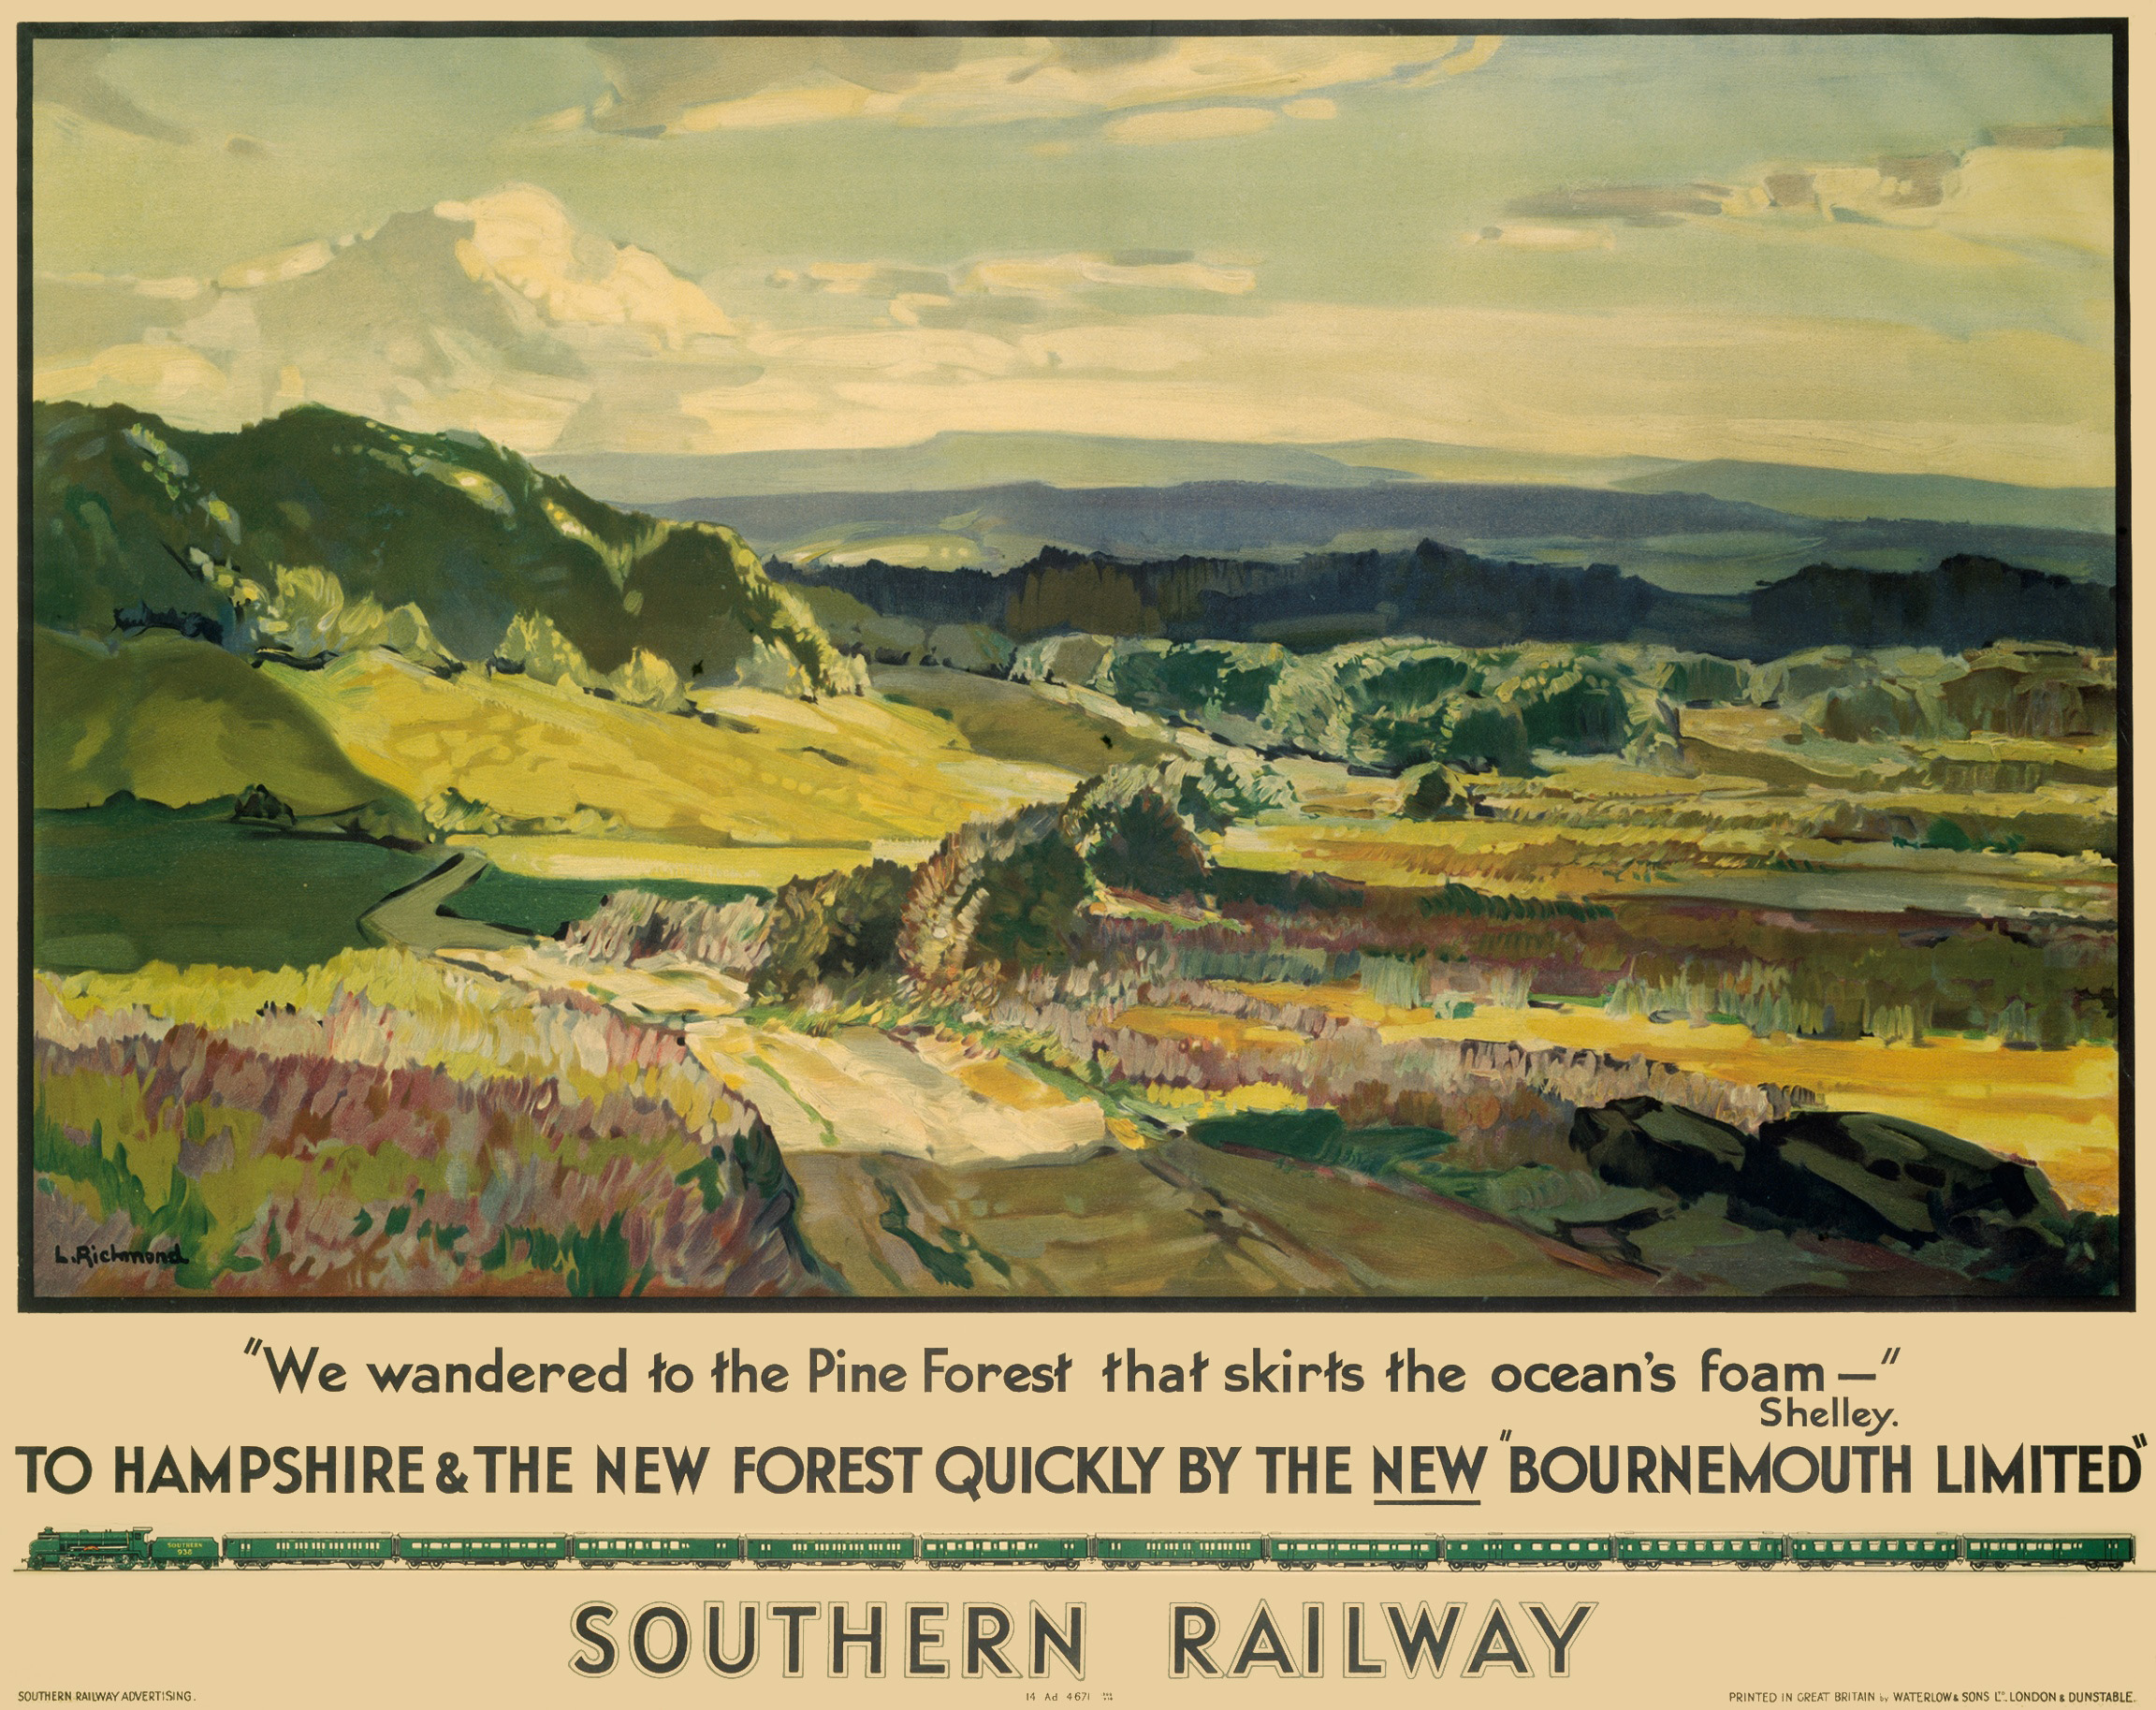 ‘To Hampshire and the New Forest Quickly by the New “Bournemouth Limited”’. Poster produced for Southern Railway (SR) promoting train services to Hampshire and the New Forest. The poster shows a panoramic view of the countryside with a quote by Percy Bysshe Shelley (1792-1822). Artwork by Leonard Richmond, who studied at the Taunton School of Art and Chelsea Polytechnic and exhibited widely both in London and abroad. He painted landscapes and figures and designed posters for the Great Western Railway (GWR) and Southern Railway (SR). Dimensions: 1016 mm x 1270 mm.